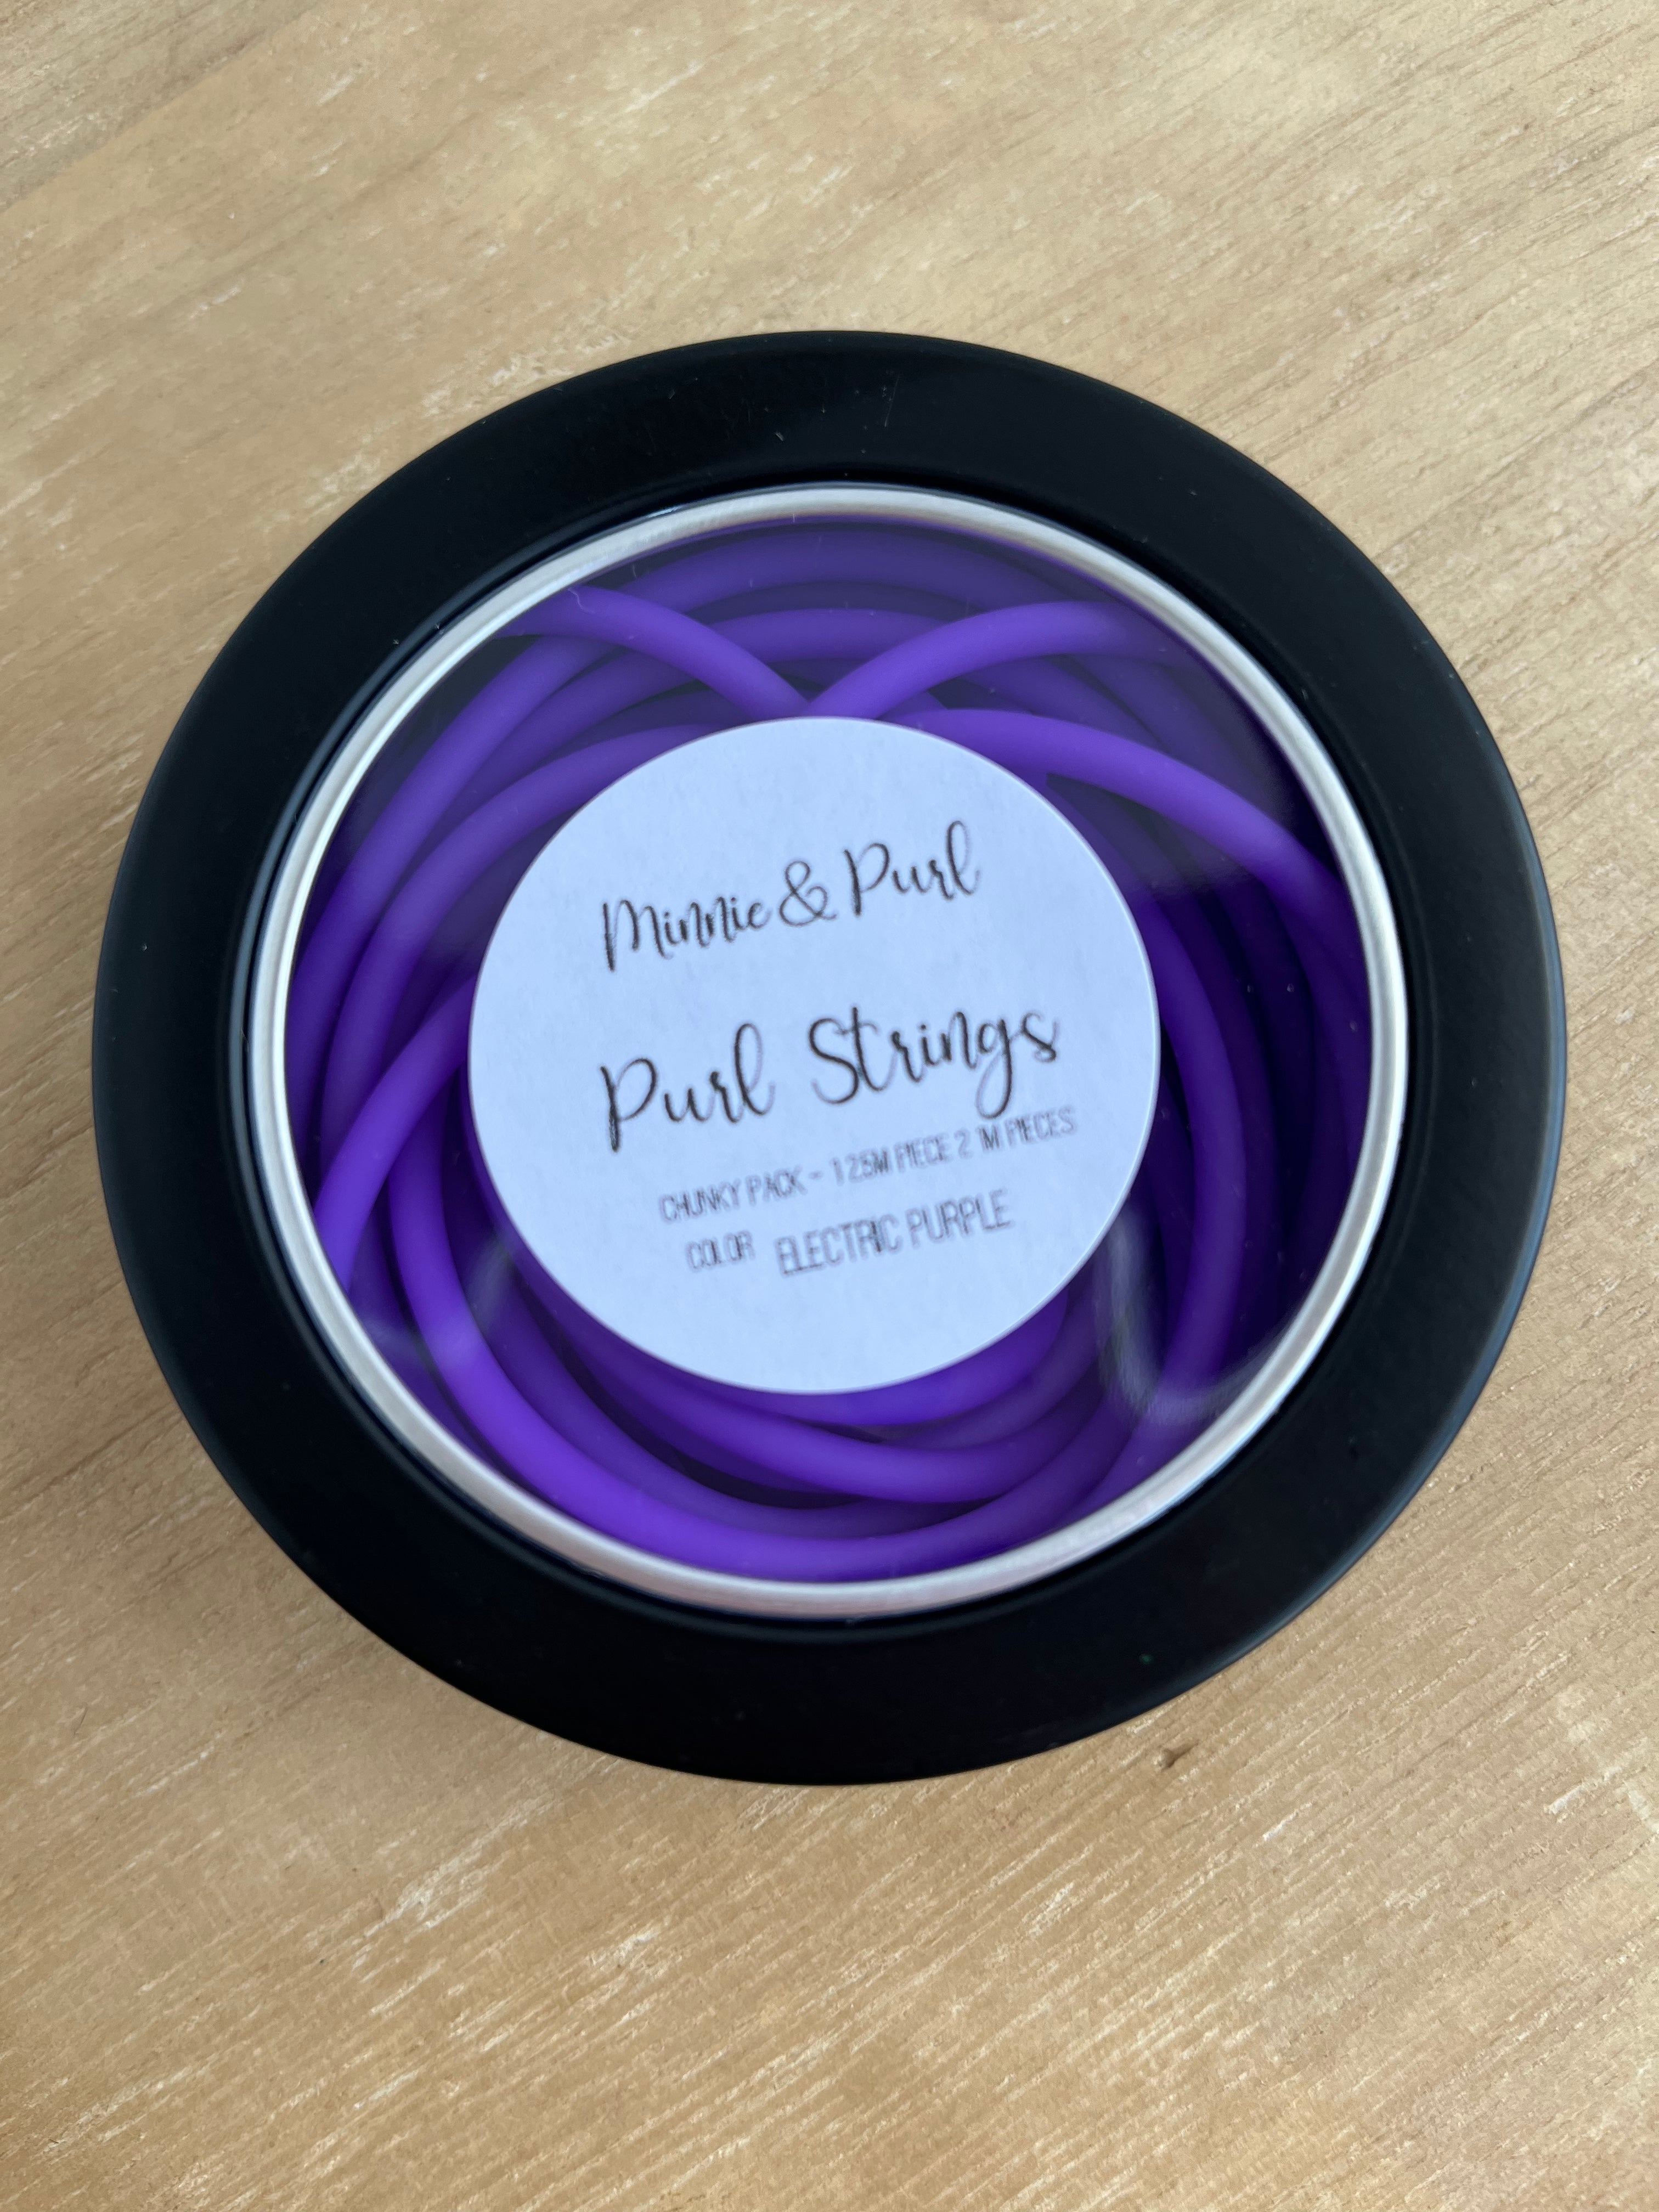 Purl Strings Chunky - Electric purple 